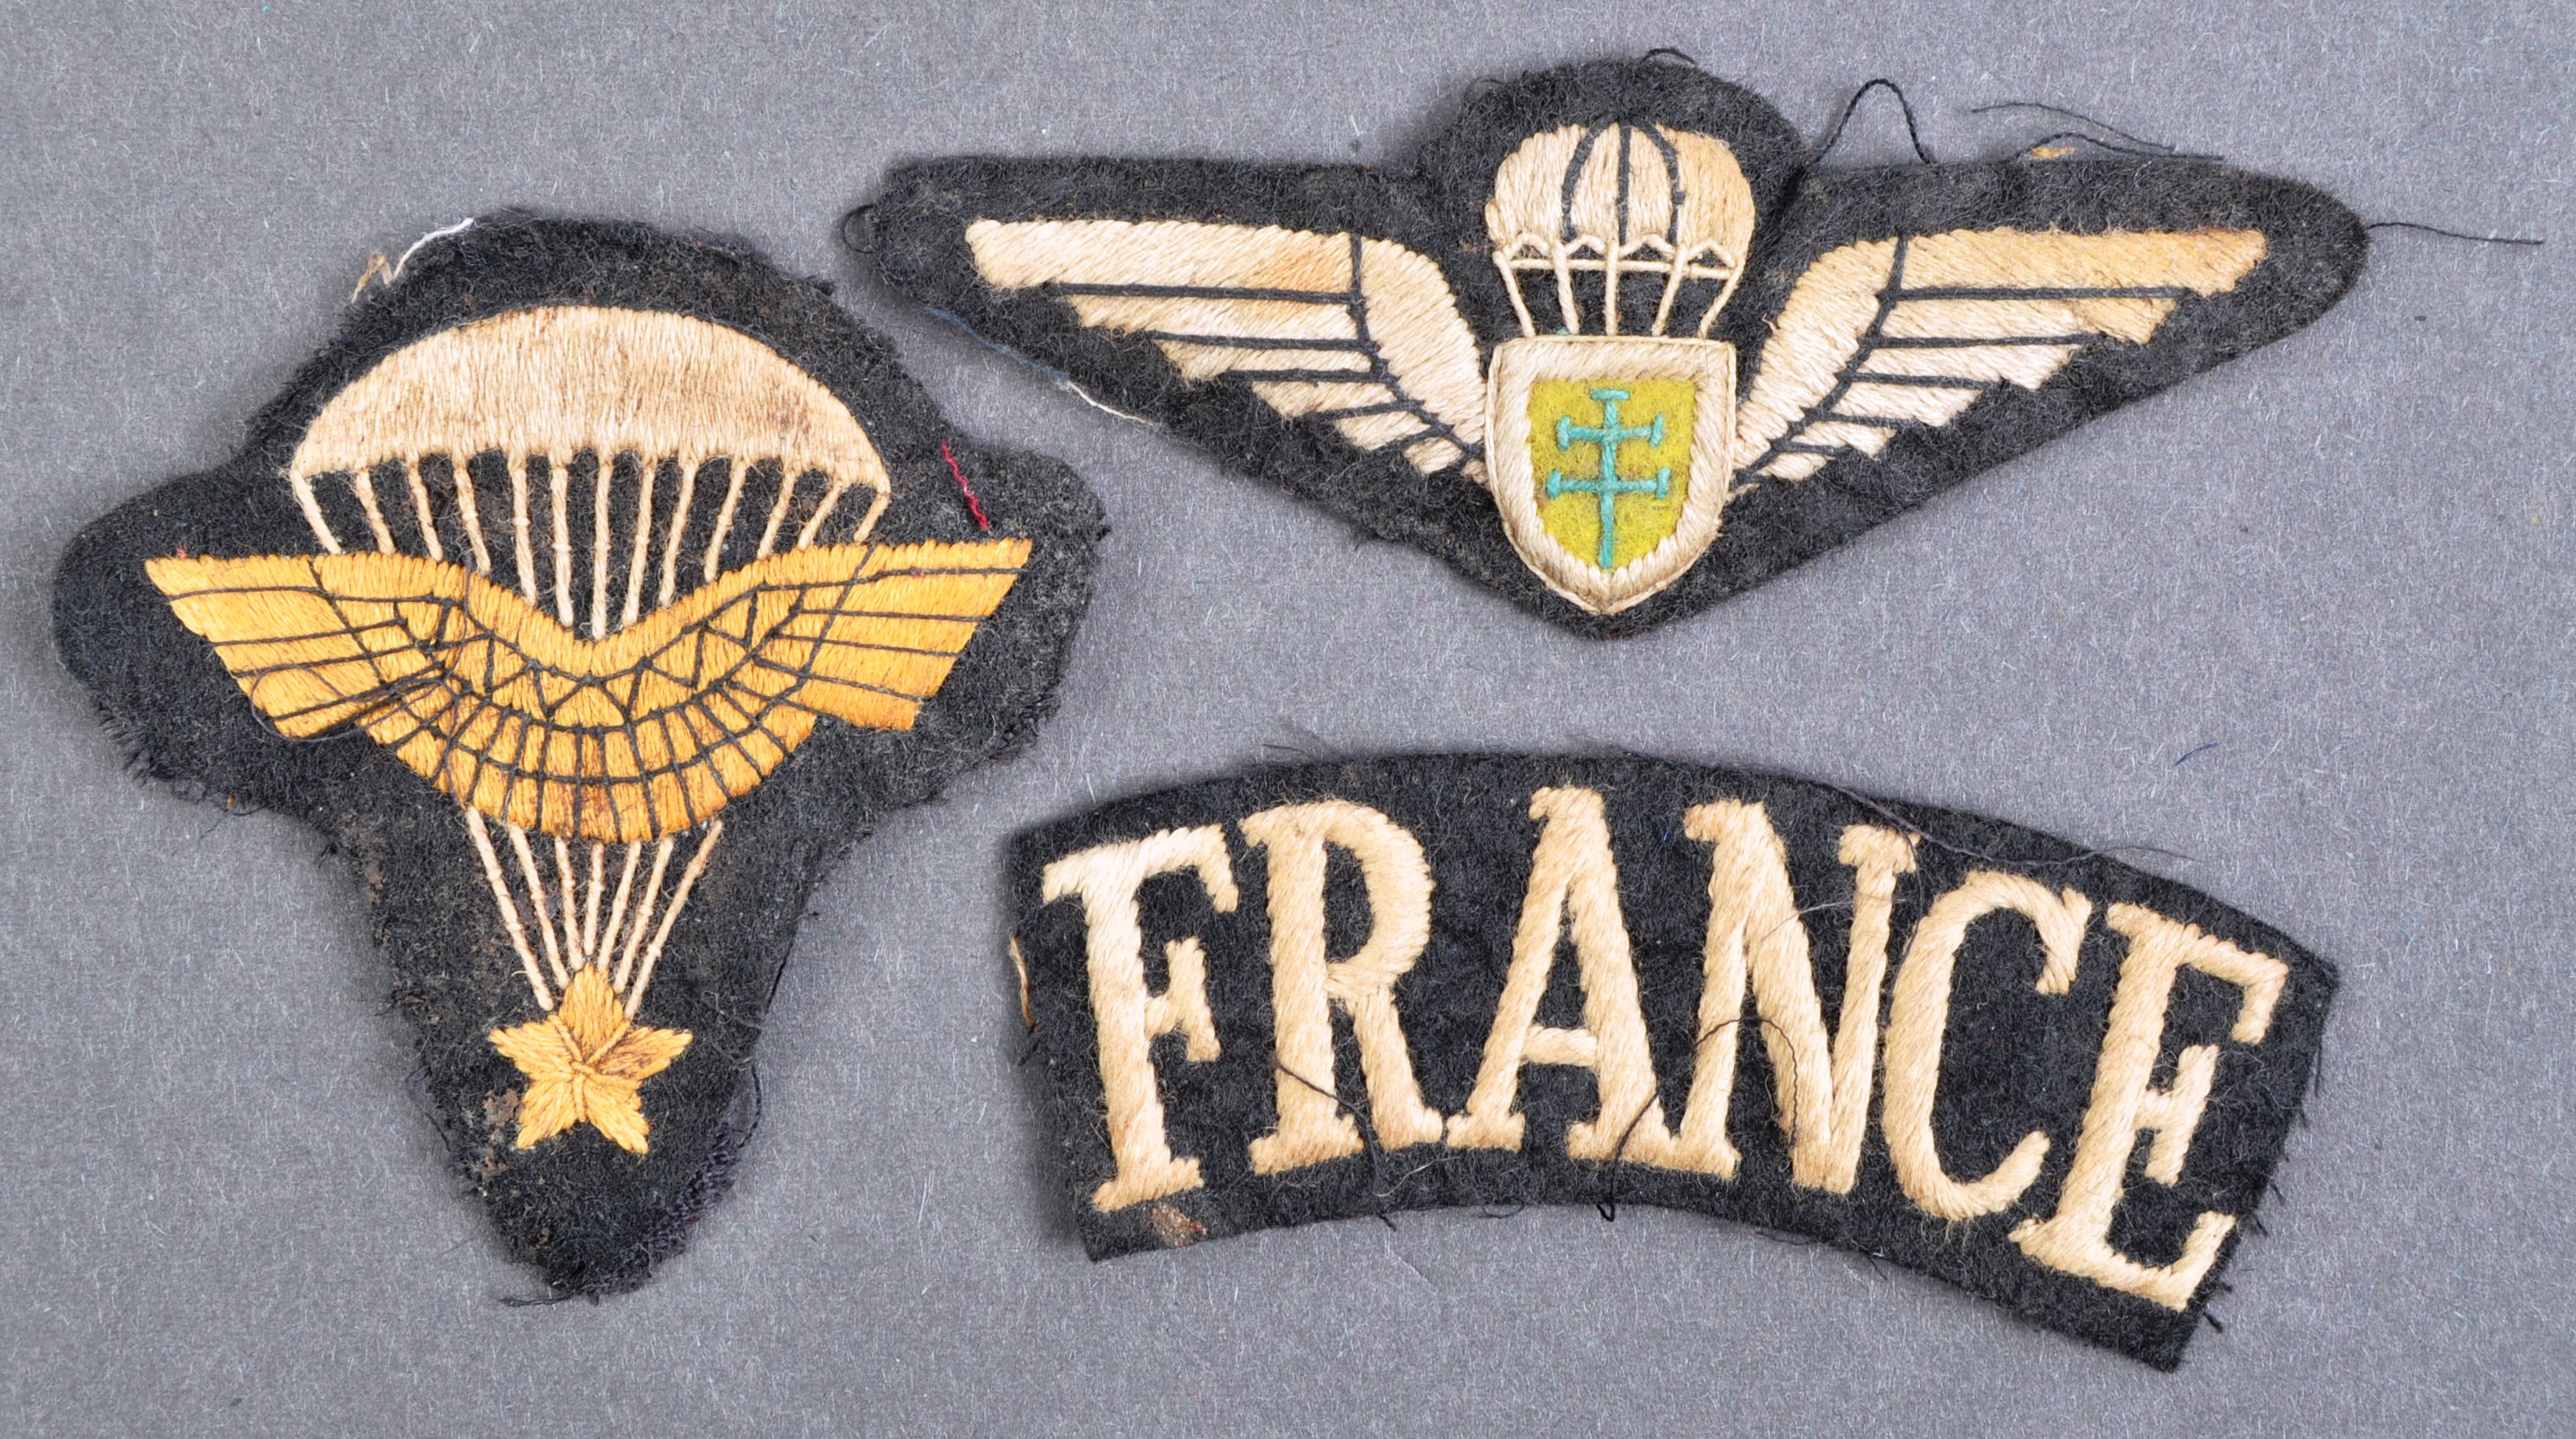 COLLECTION OF WWII SECOND WORLD WAR INTEREST CLOTH PATCHES